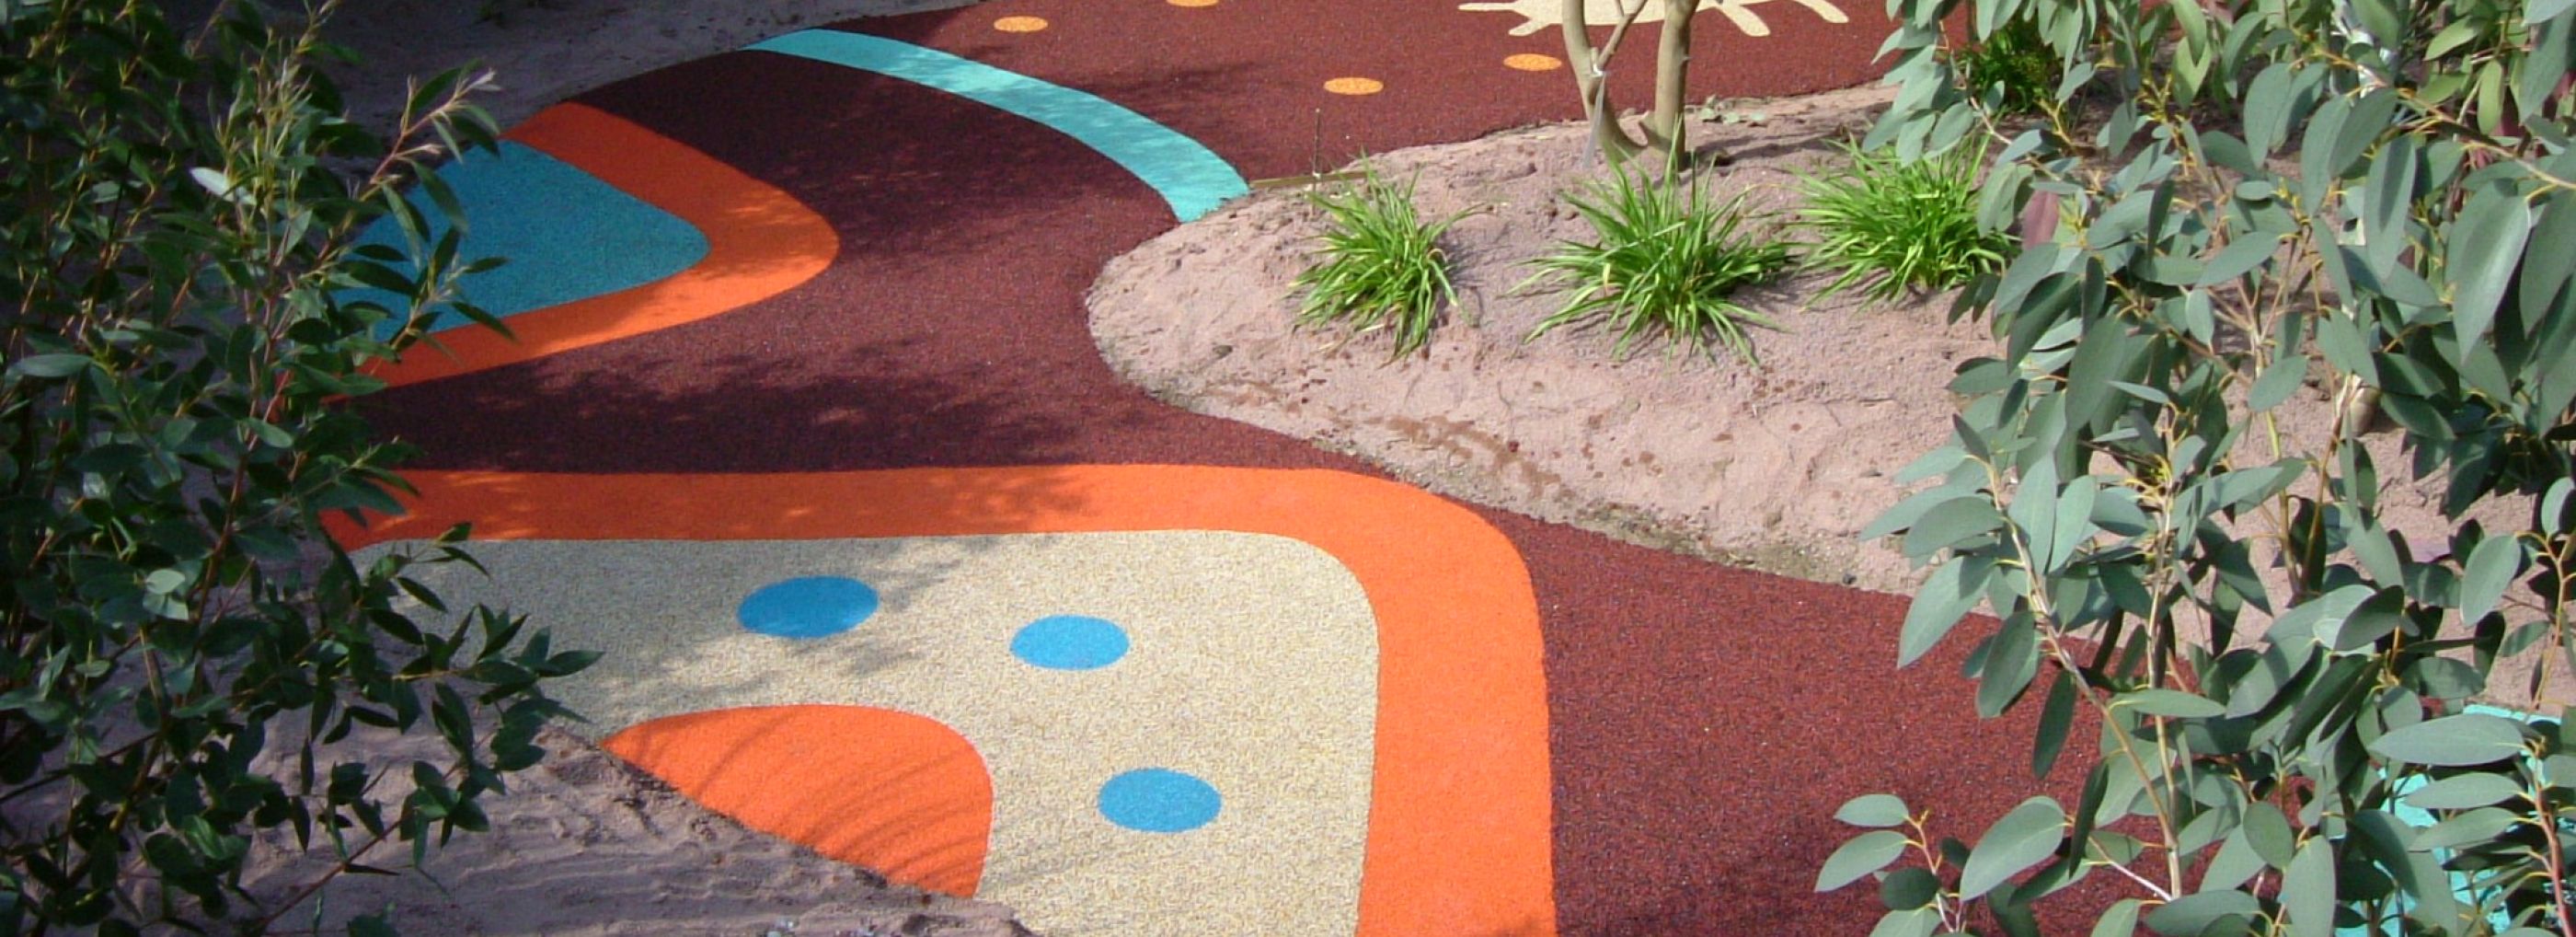 Colourful walkway in a Zoo which has animal footprint designed into it.